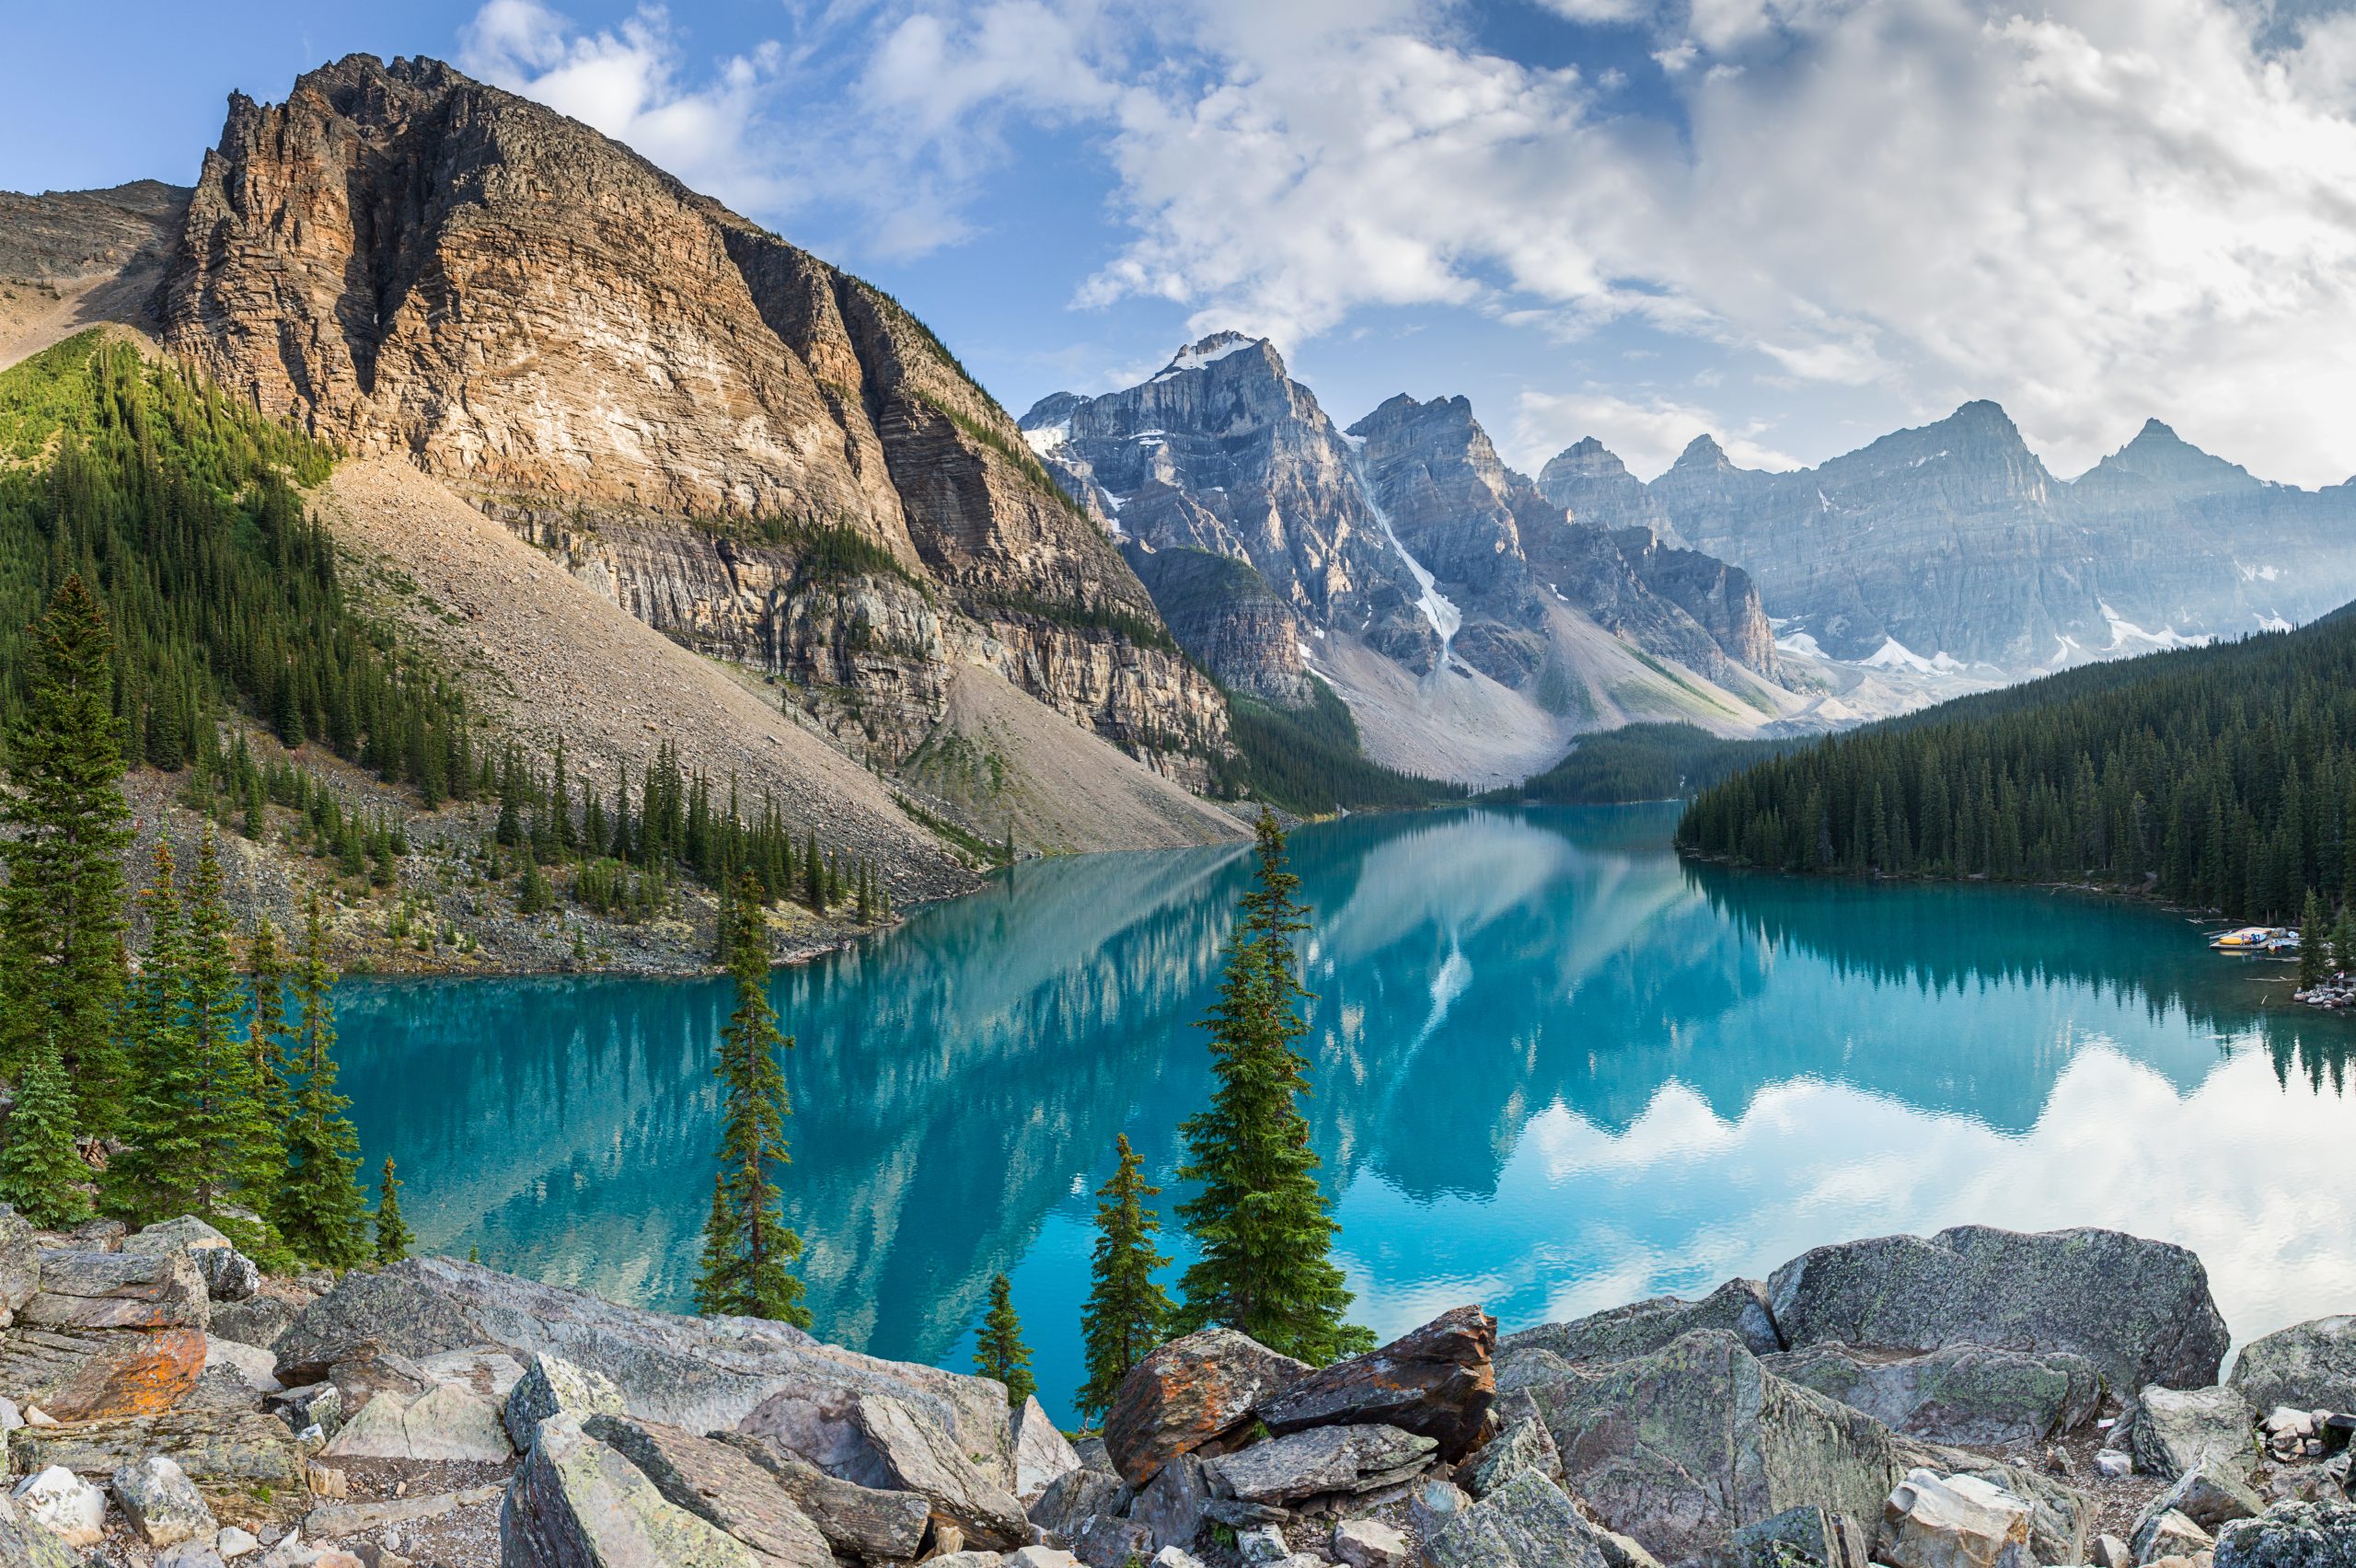 Moraine,Lake,With,The,Rocky,Mountains,Panorama,In,The,Banff